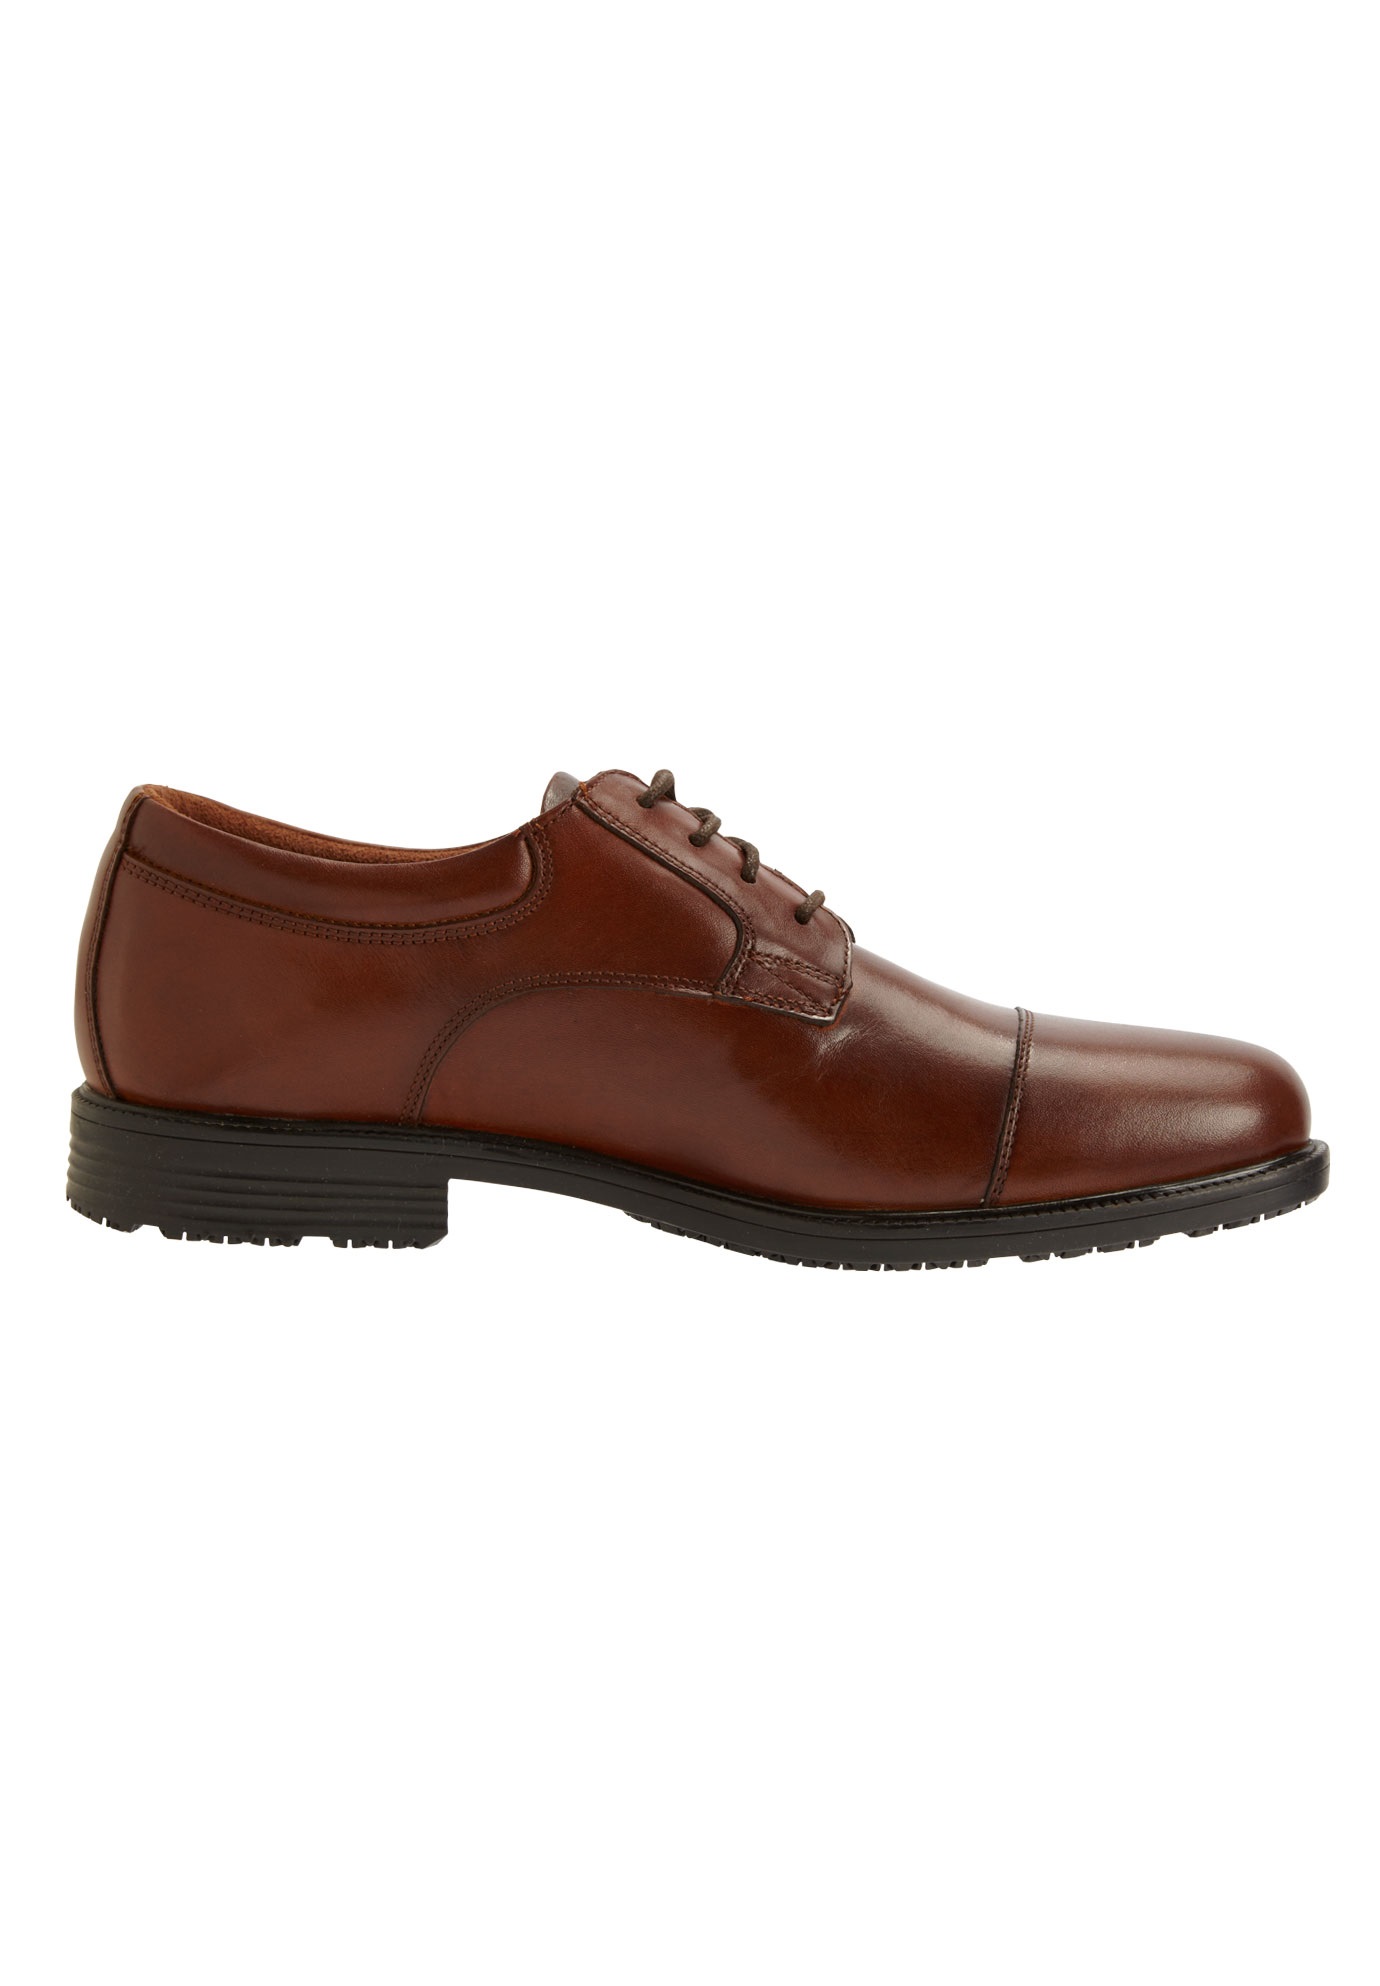 Rockport® Essential Details Waterproof Dress Shoe| Big and Tall Shoes ...